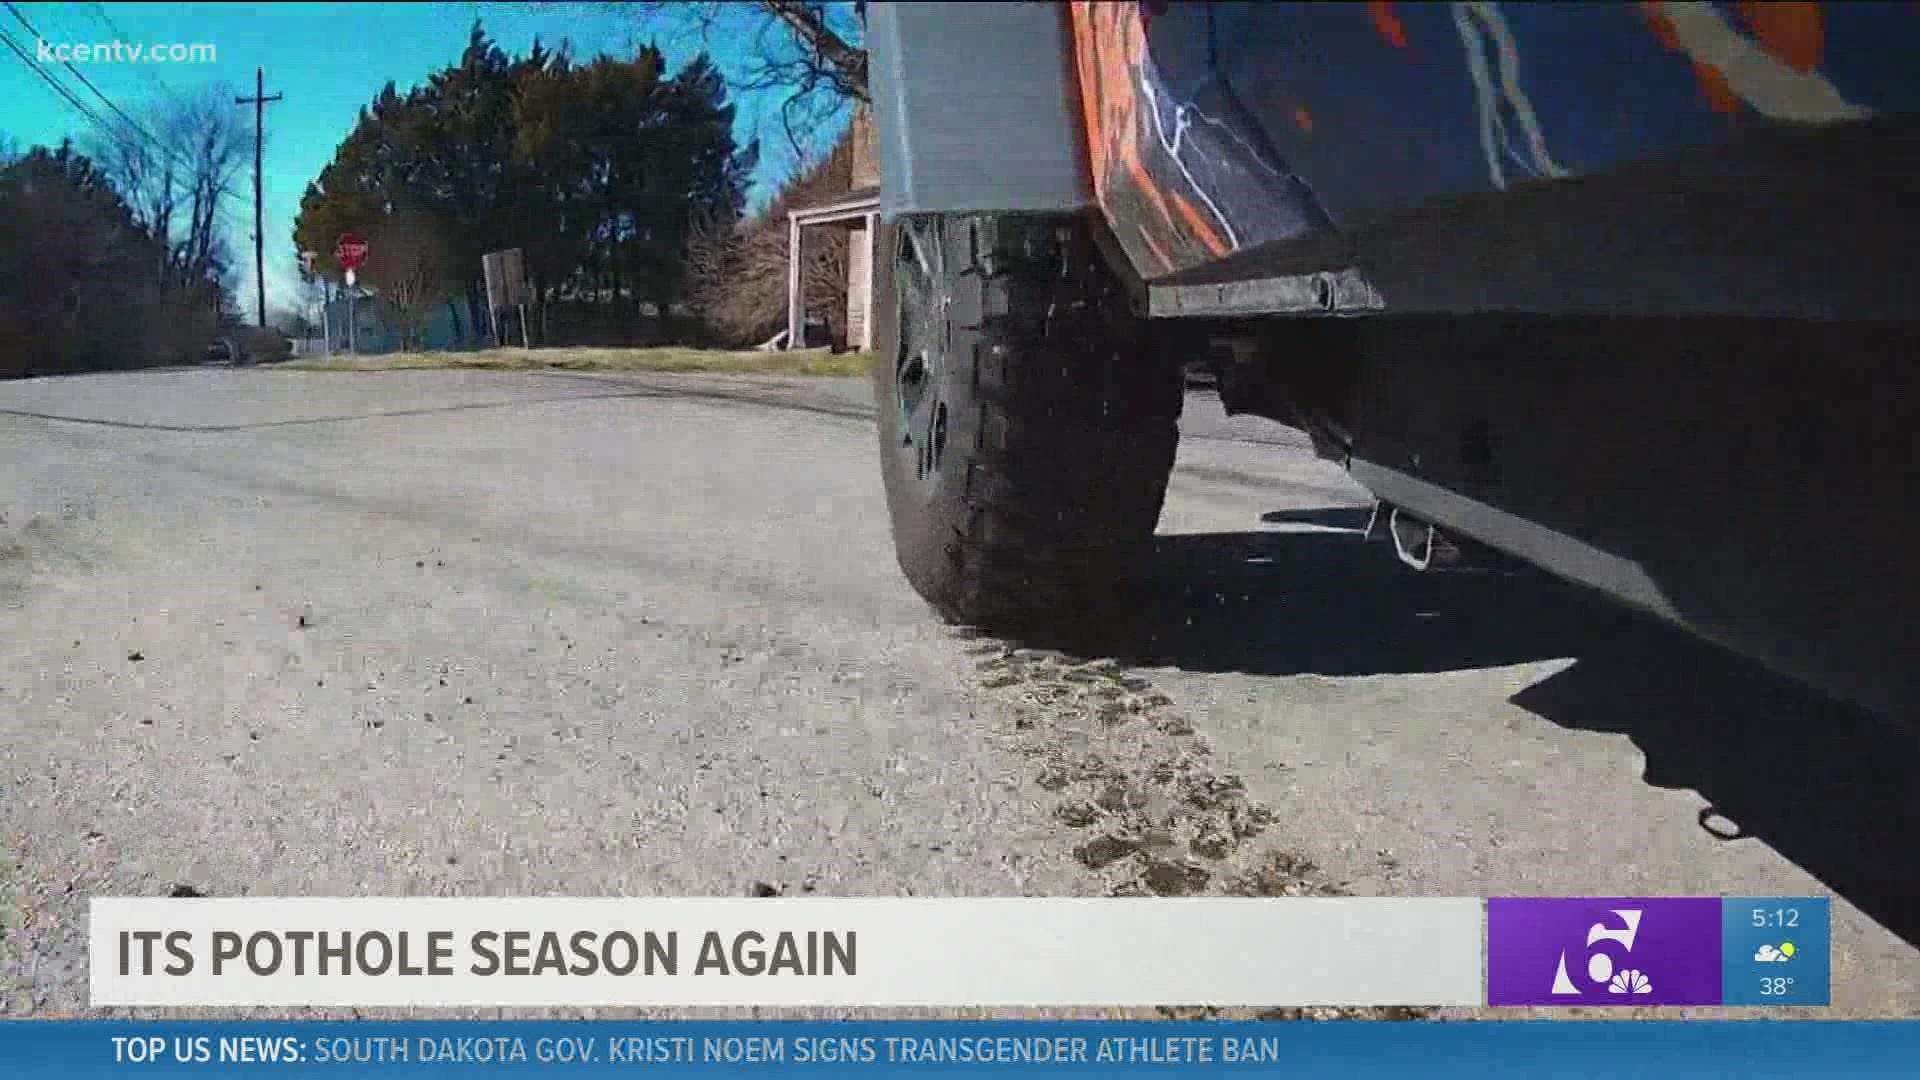 It's pothole season, which means expensive repairs. Experts advise tips with a cautionary warning.